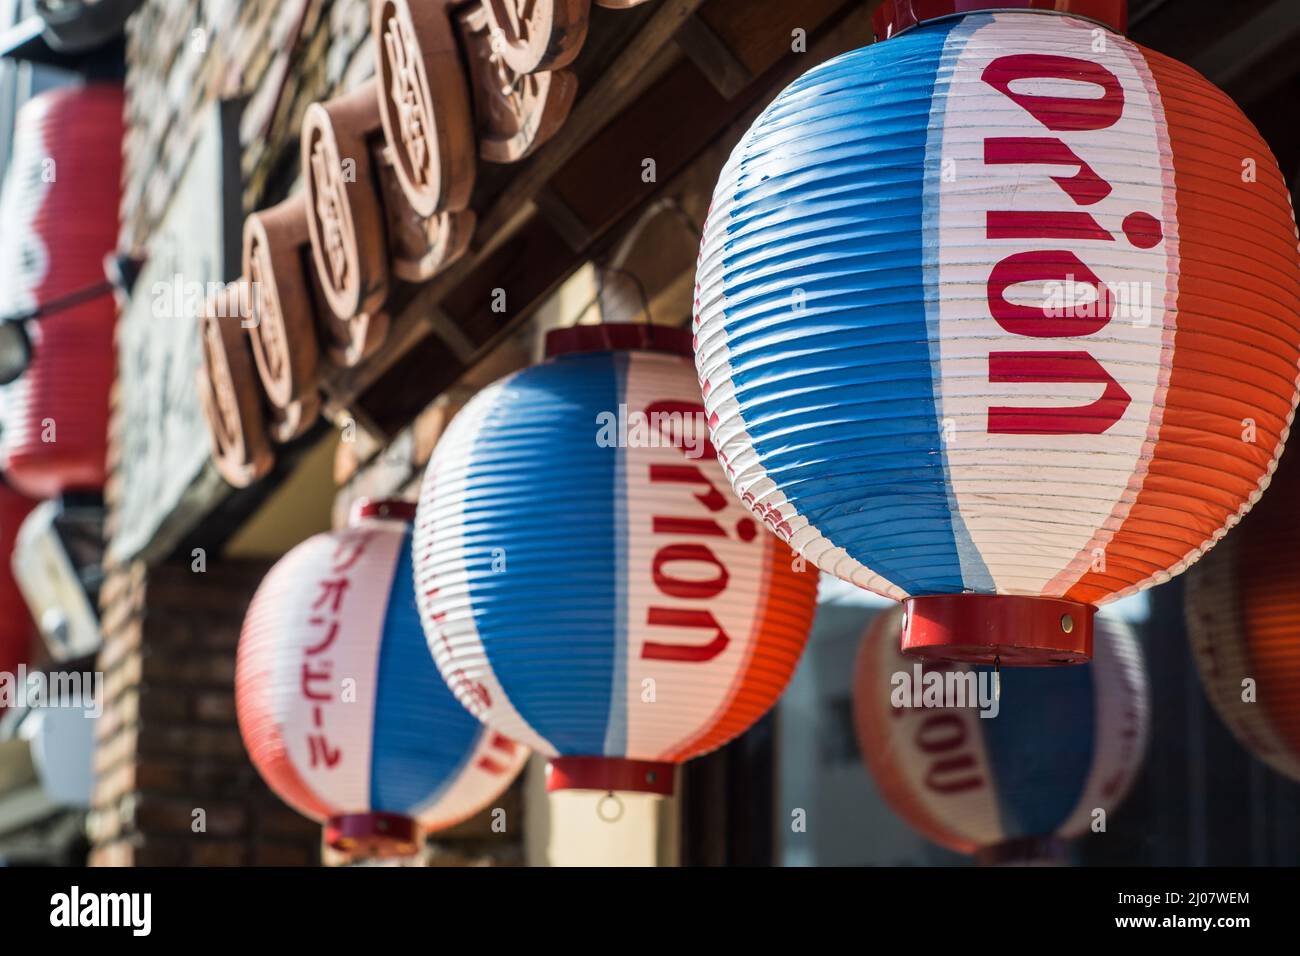 Close up of red, blue and white hanging paper Japanese lanterns promoting Orion beer outside an Okinawa restaurant in Nara, Japan Stock Photo